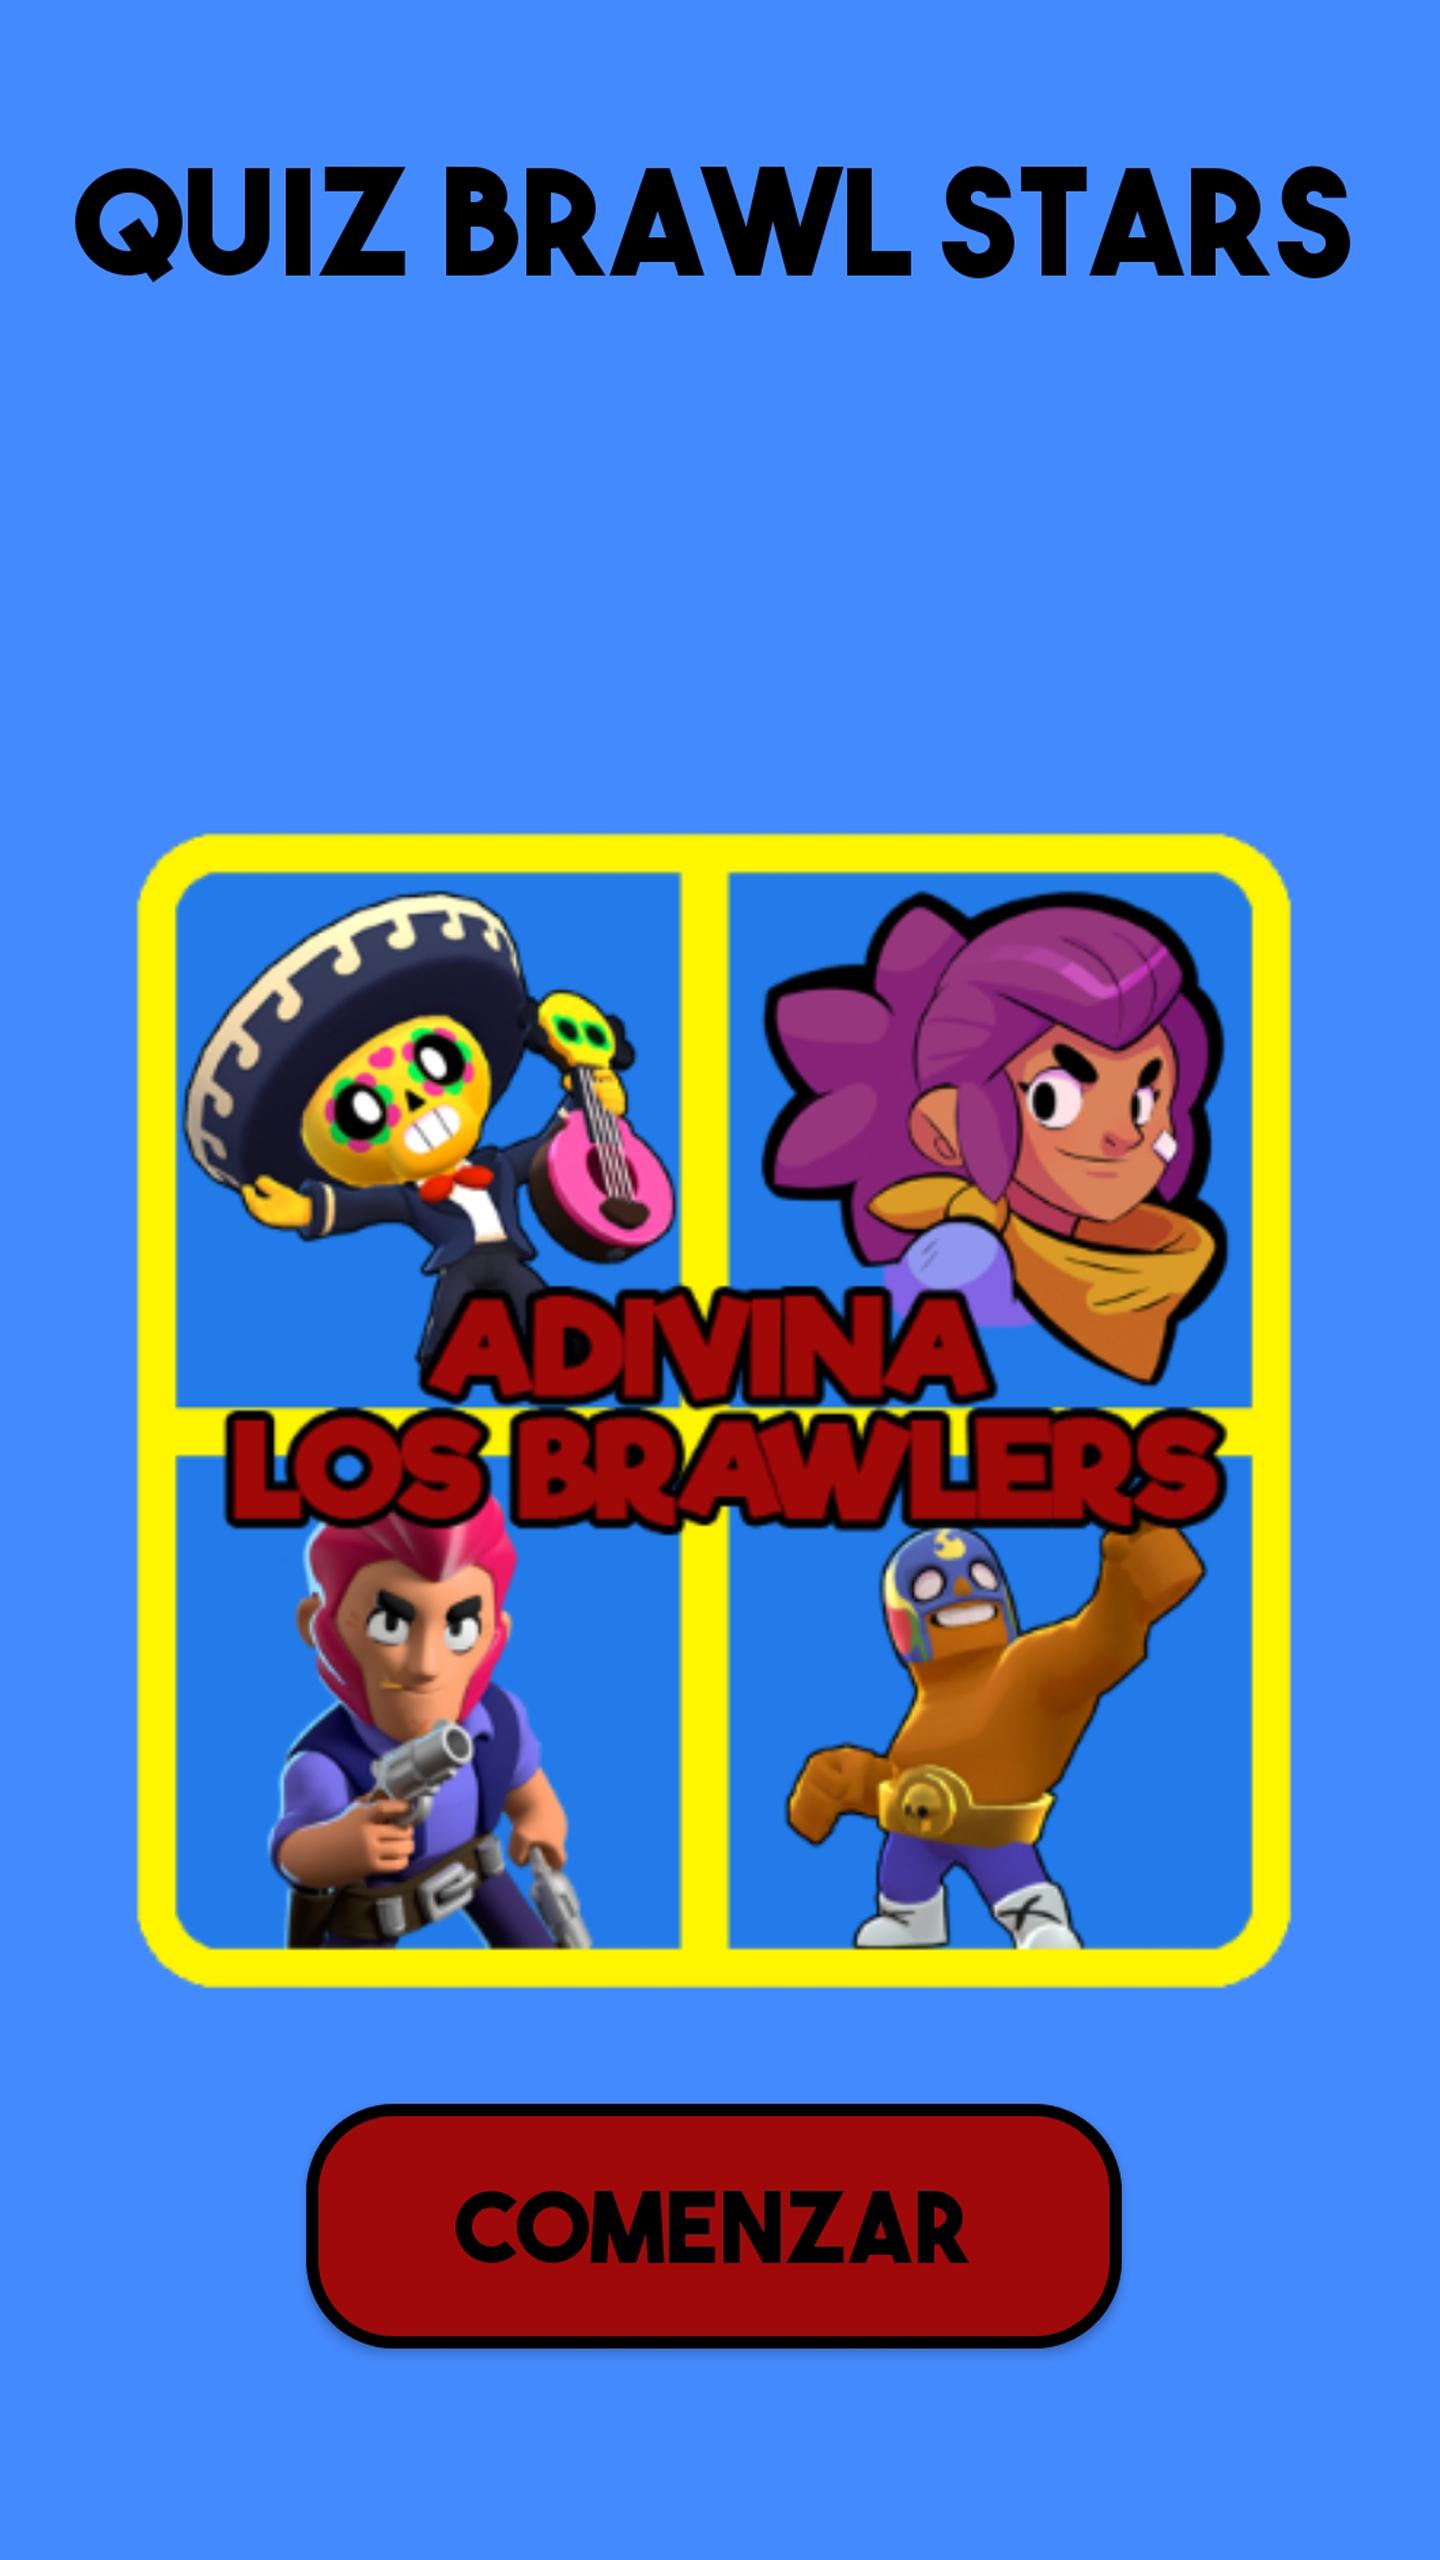 Guess The Brawlers Quiz Brawl Stars For Android Apk Download